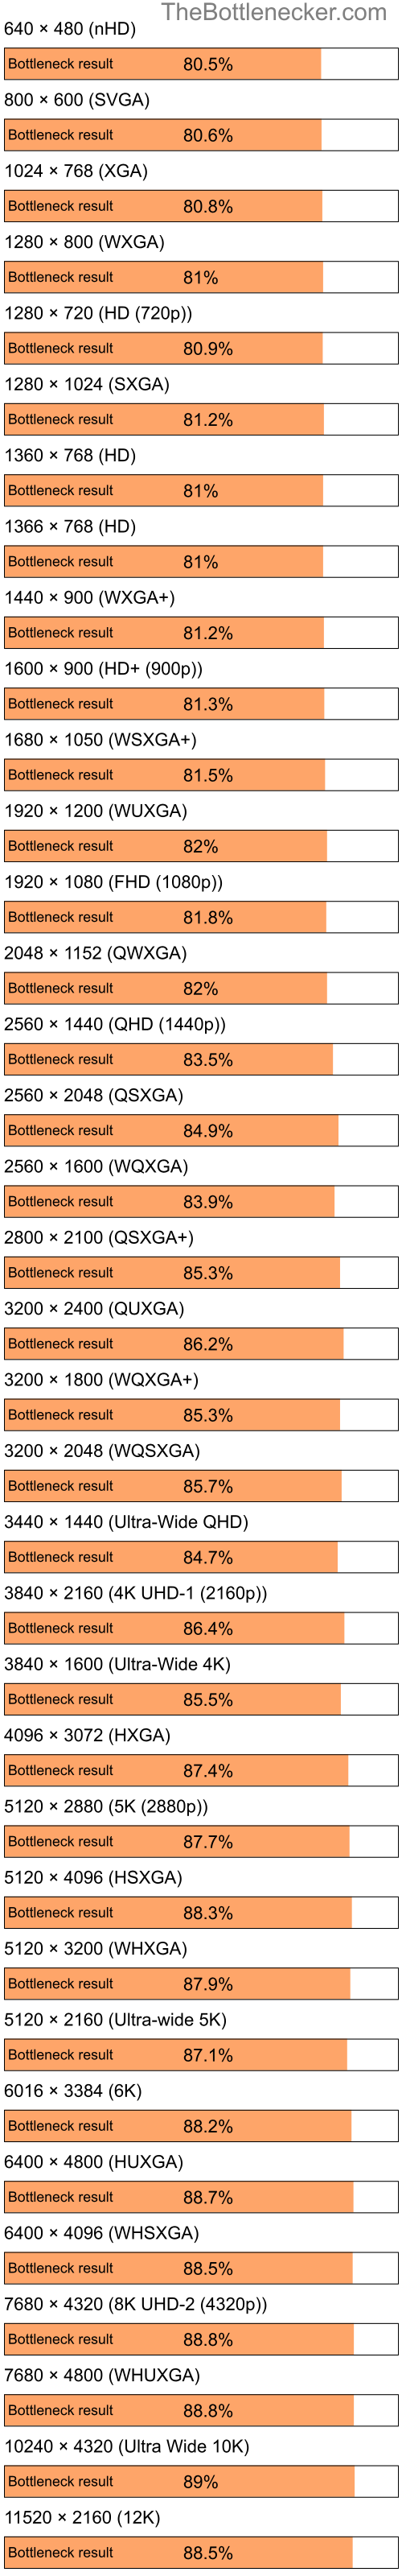 Bottleneck results by resolution for Intel Pentium 4 and NVIDIA GeForce 7150M in General Tasks